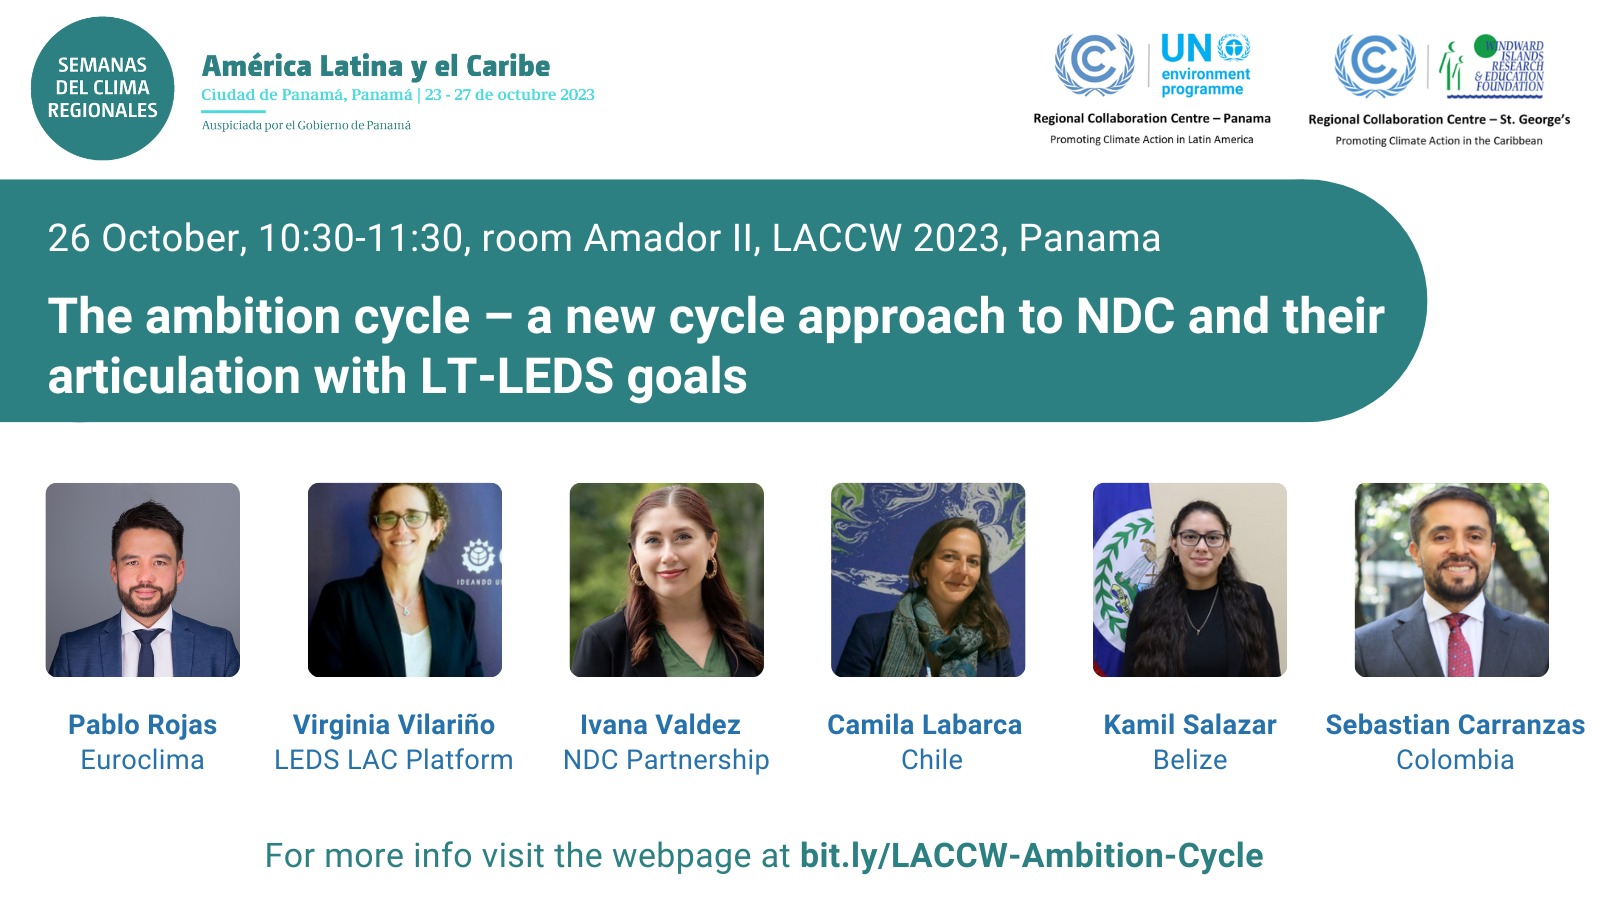 Panel of #LACCW2023 event: The Ambition Cycle, organized by RCC Latin America and RCC Caribbean - UN Climate Change